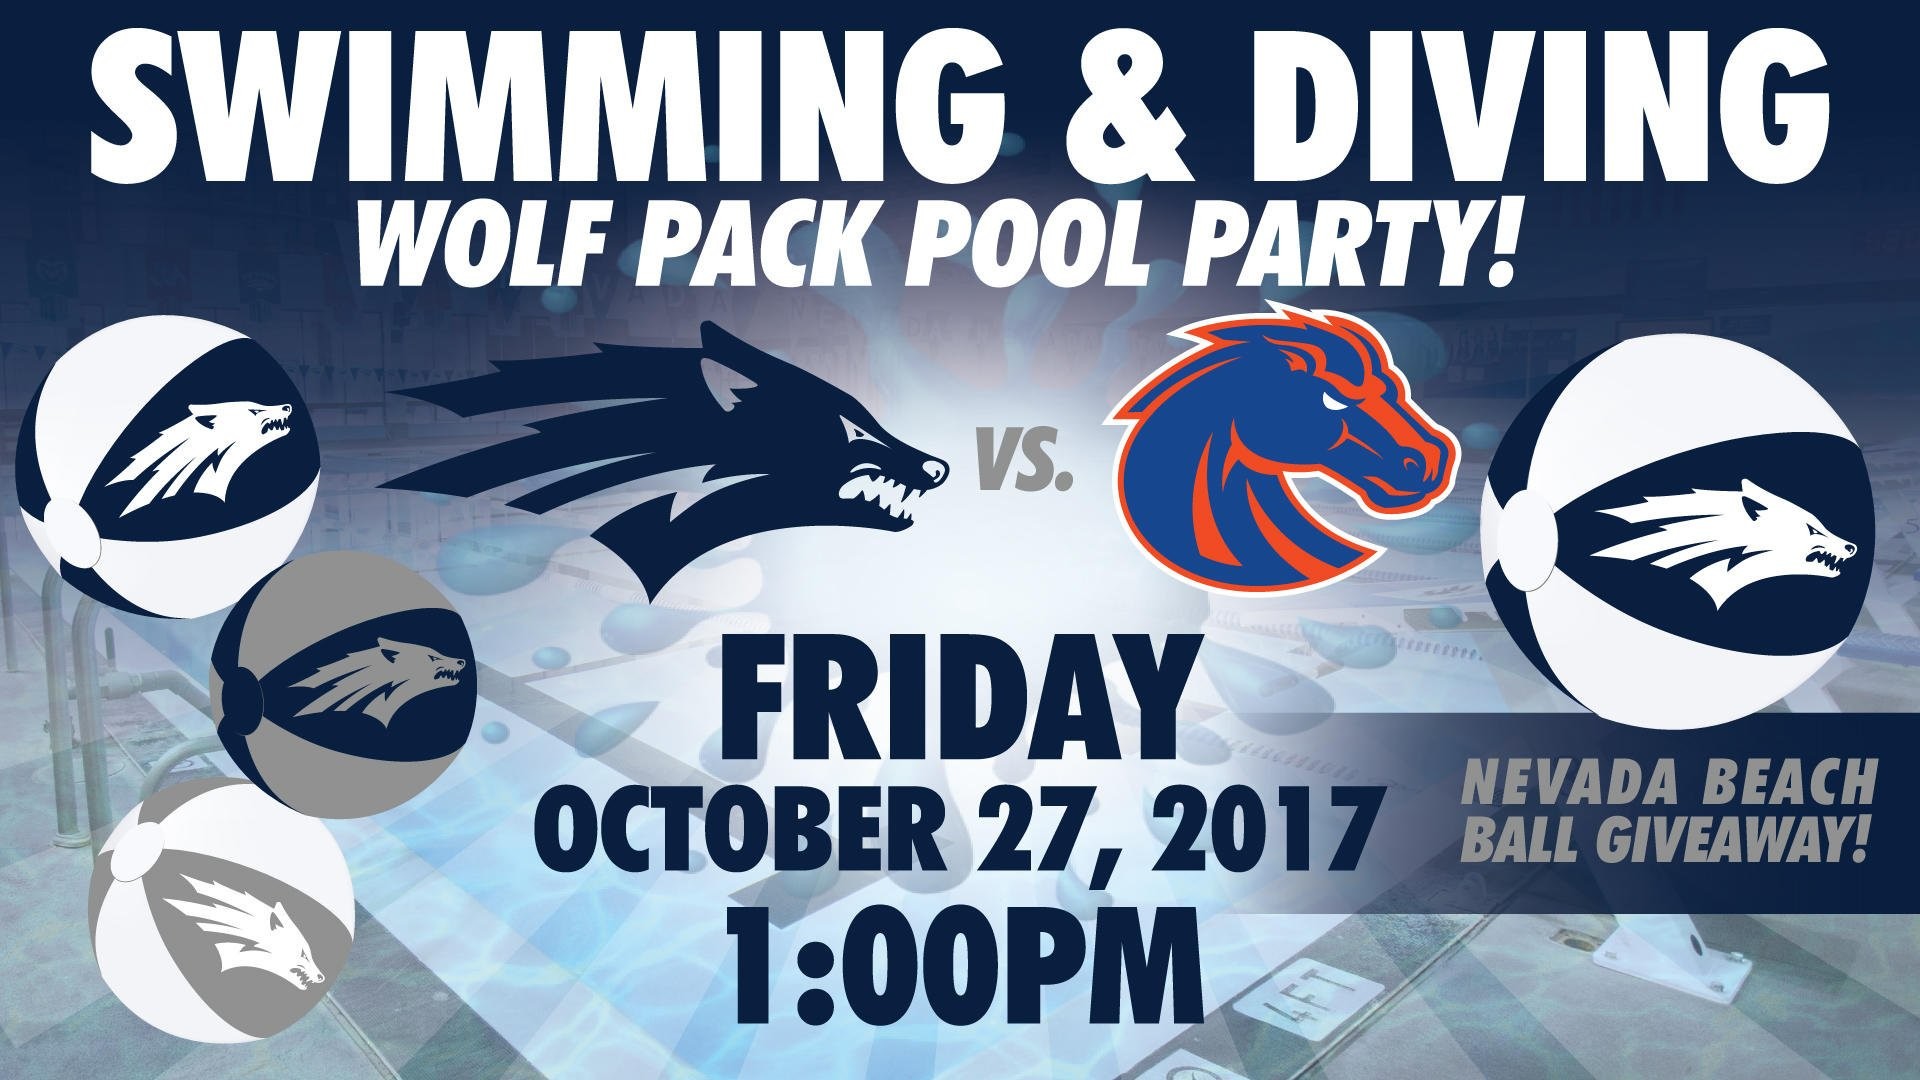 1920x1080 Nevada Wolf Pack on Twitter: "It's a party at the Lombardi Pool Friday!  @NevadaSwim takes on Boise State in an afternoon duel with a beach ball  giveaway.